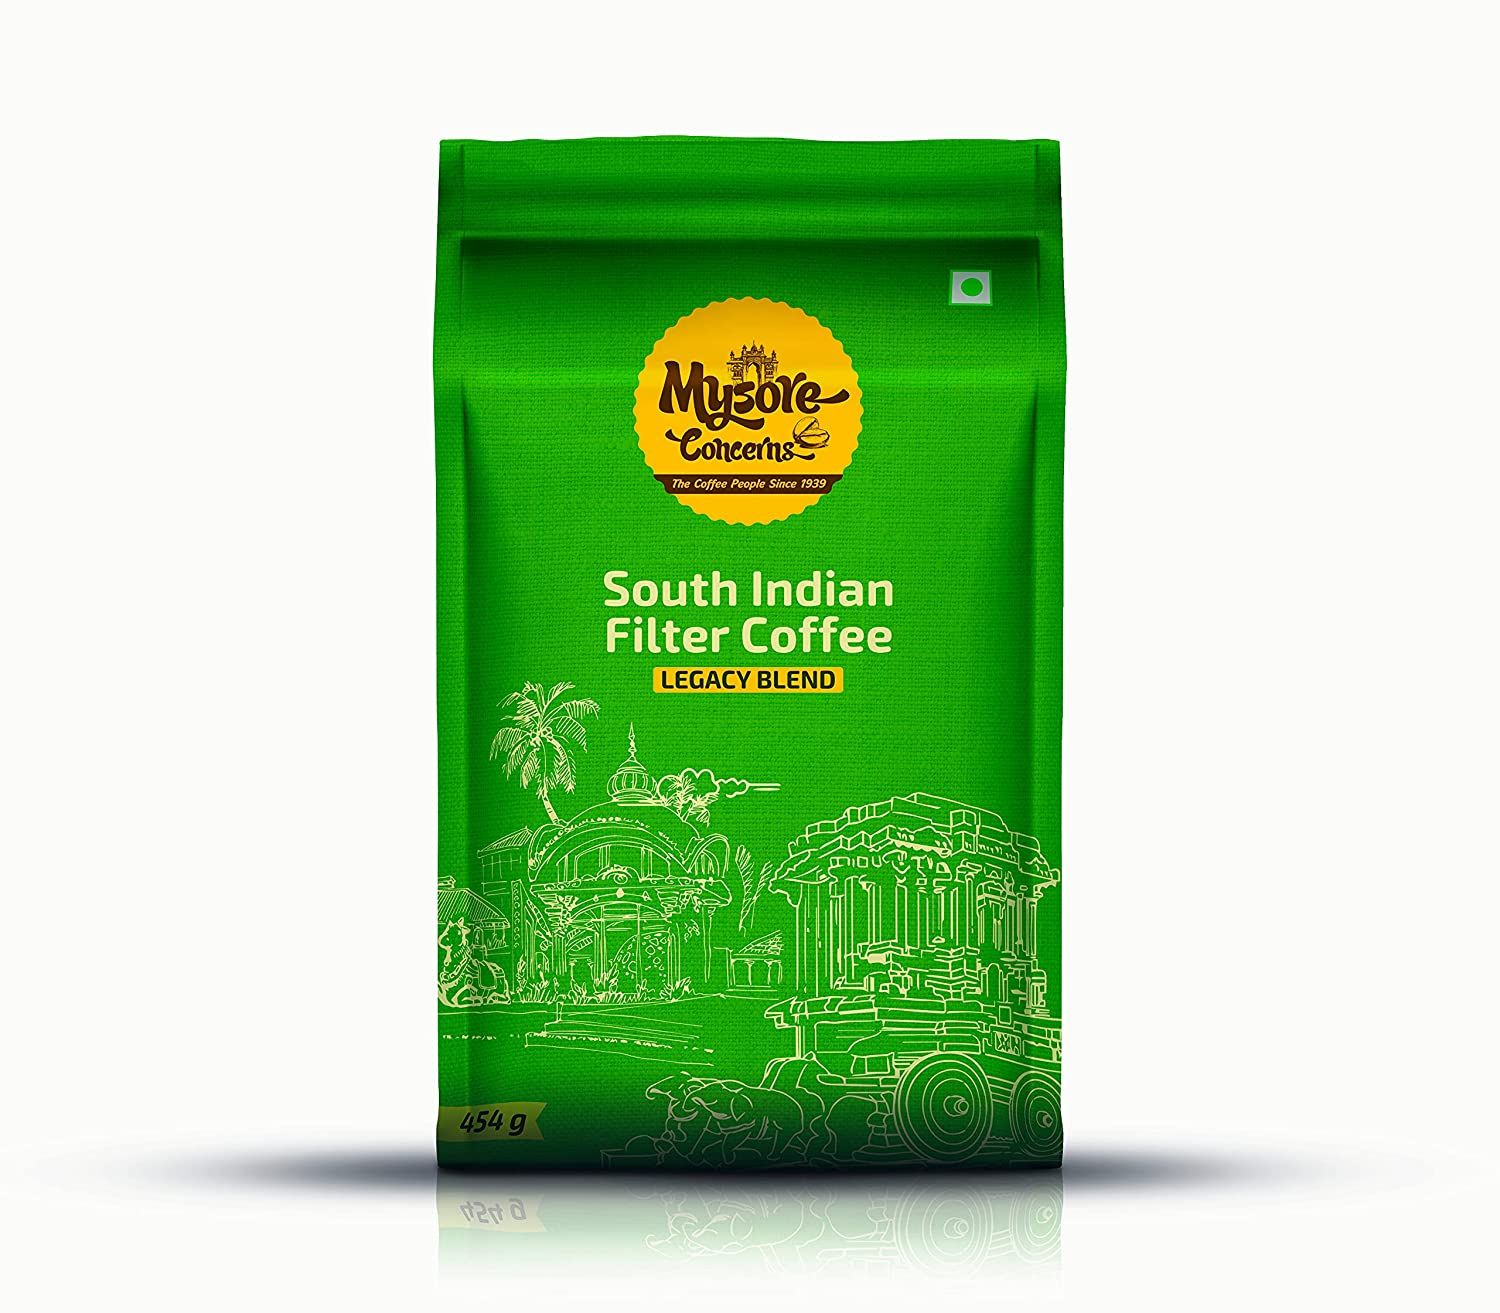 Mysore Concerns Legacy Blend South Indian Filter Coffee Image